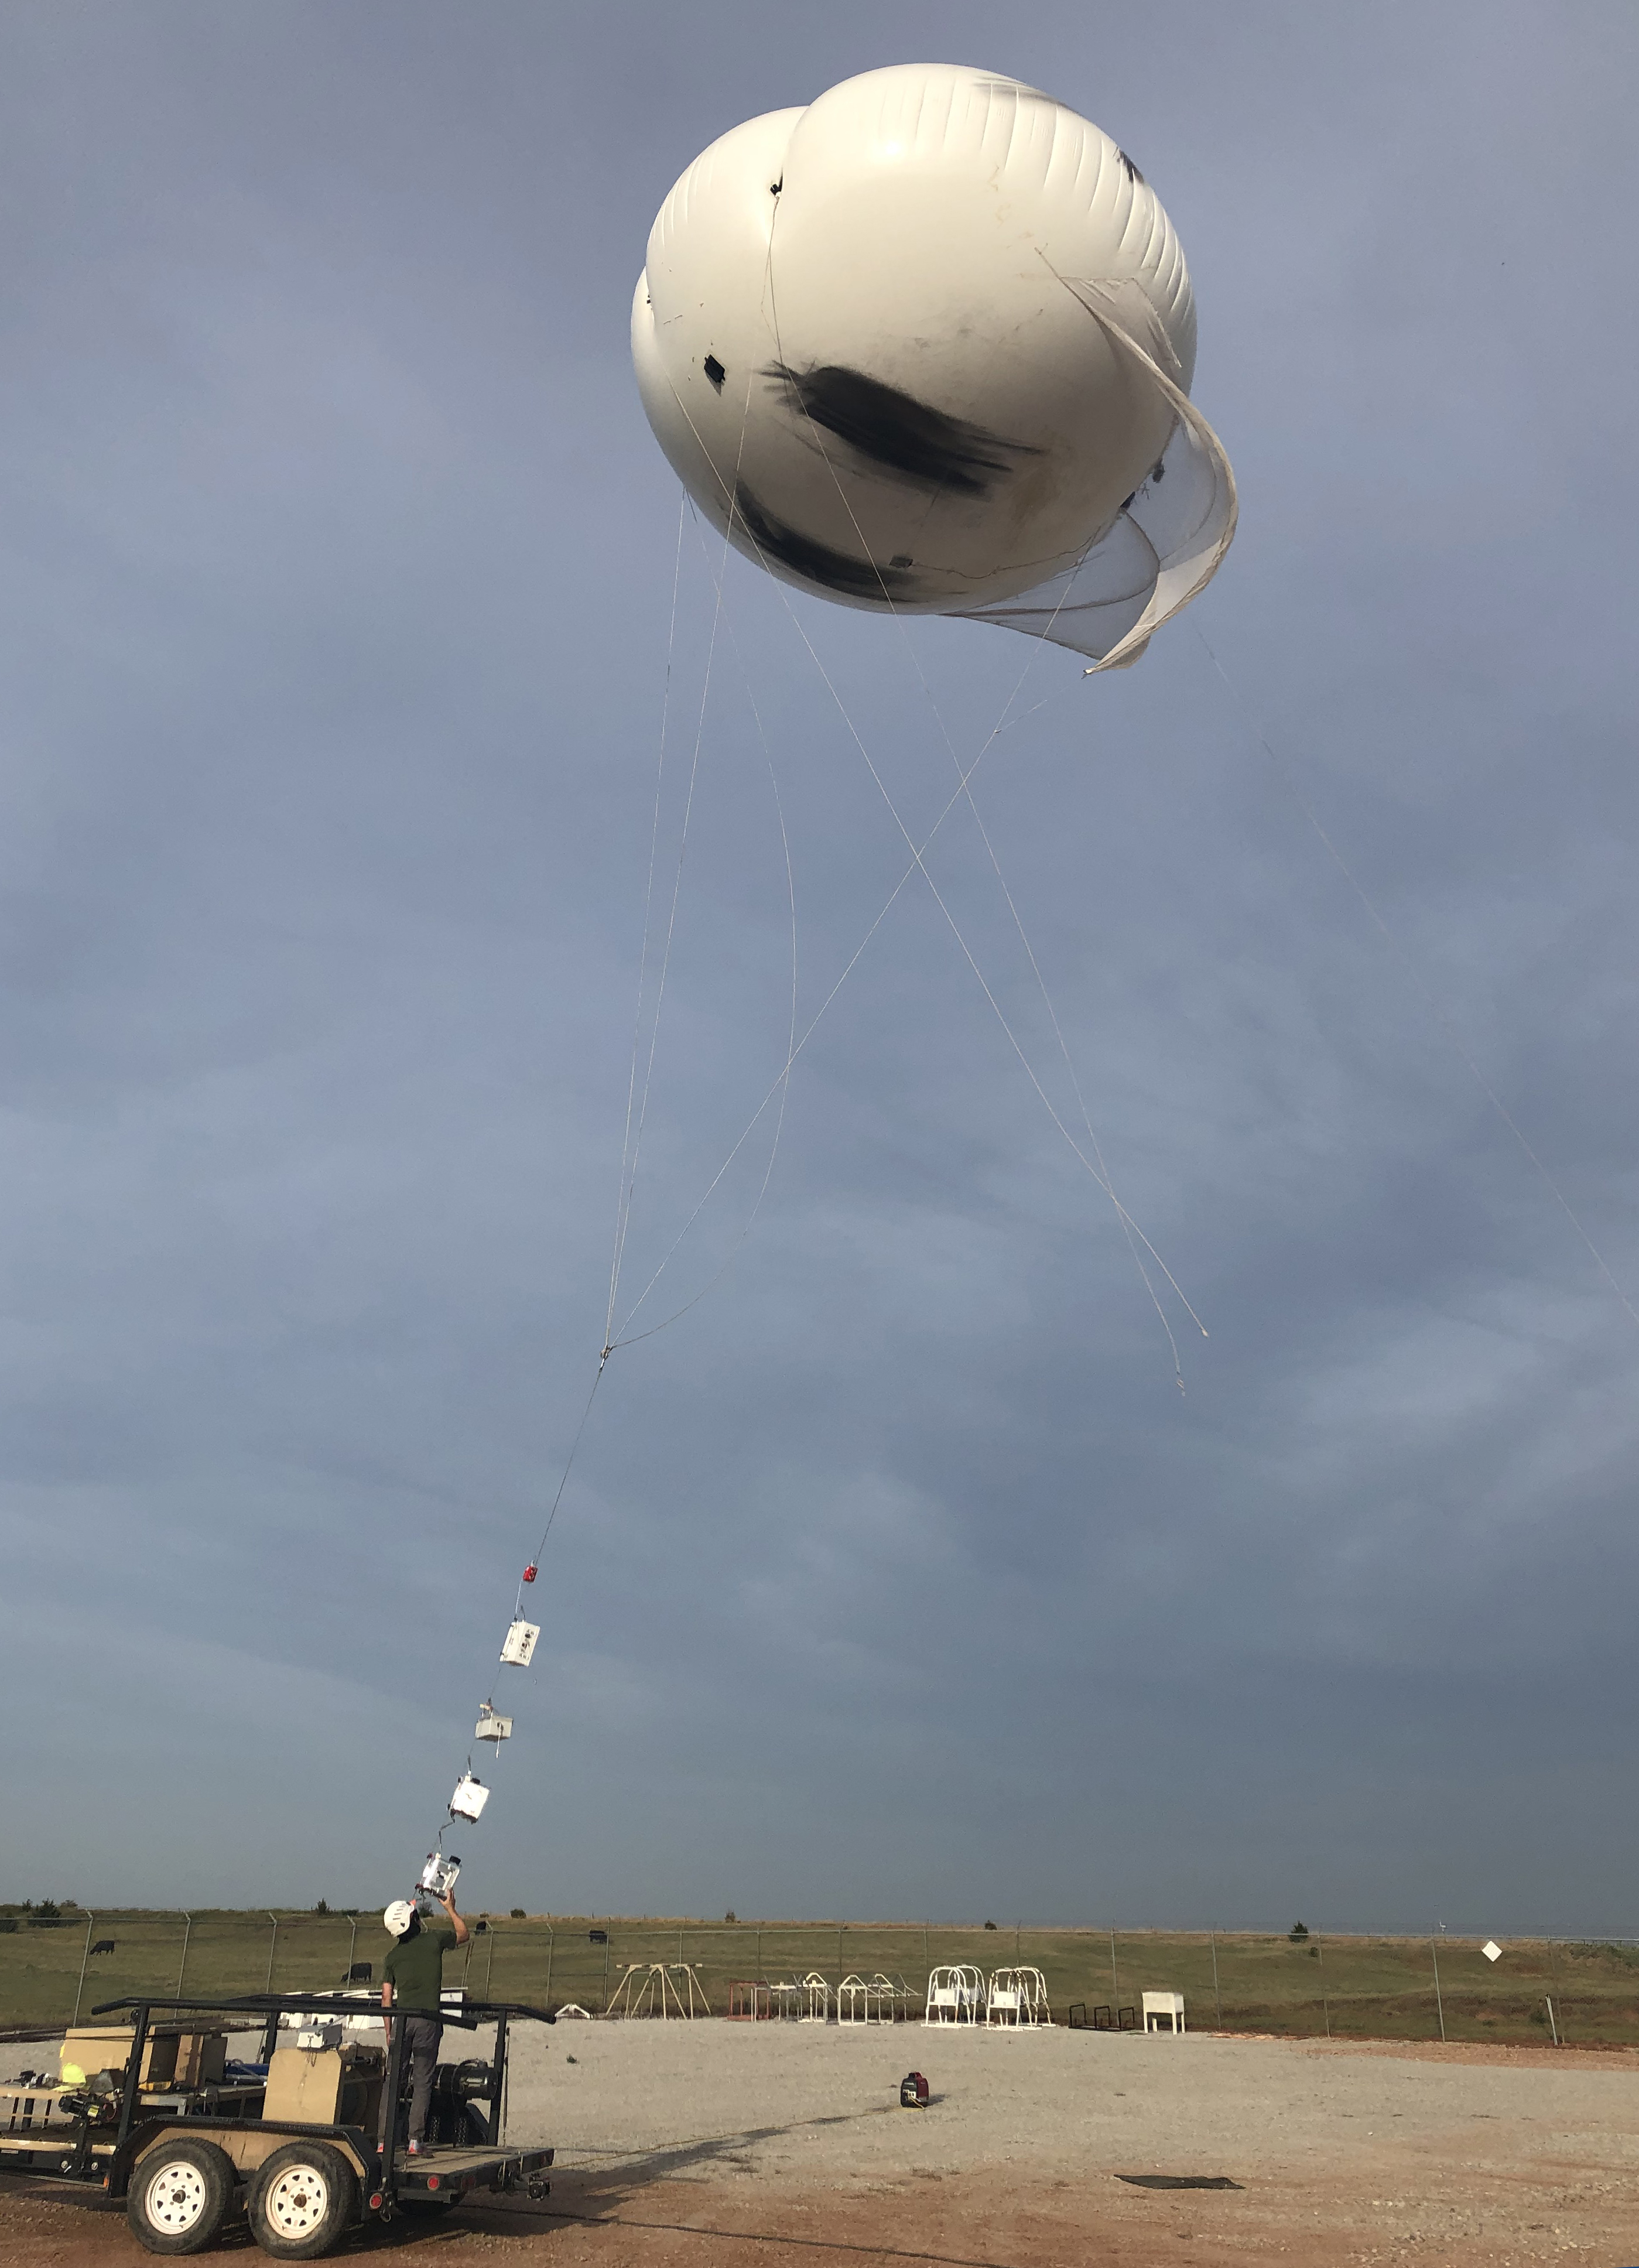 Tethered balloon system at Southern Great Plains observatory